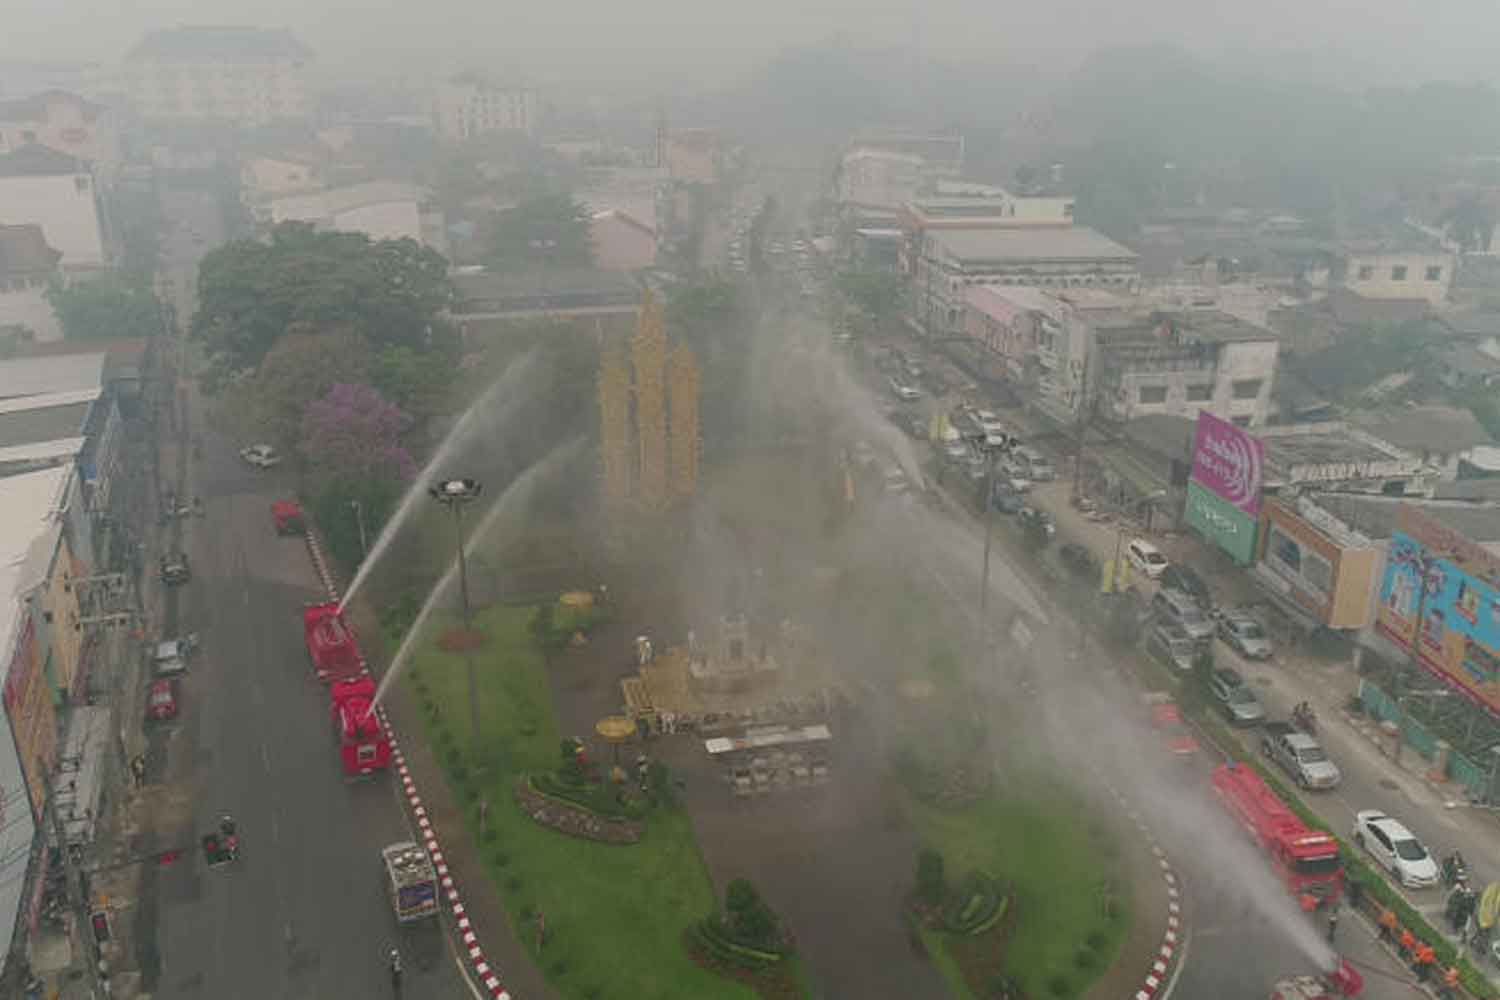 Thailand Seek Help From Neighbors to Reduce Transboundary Air Pollution